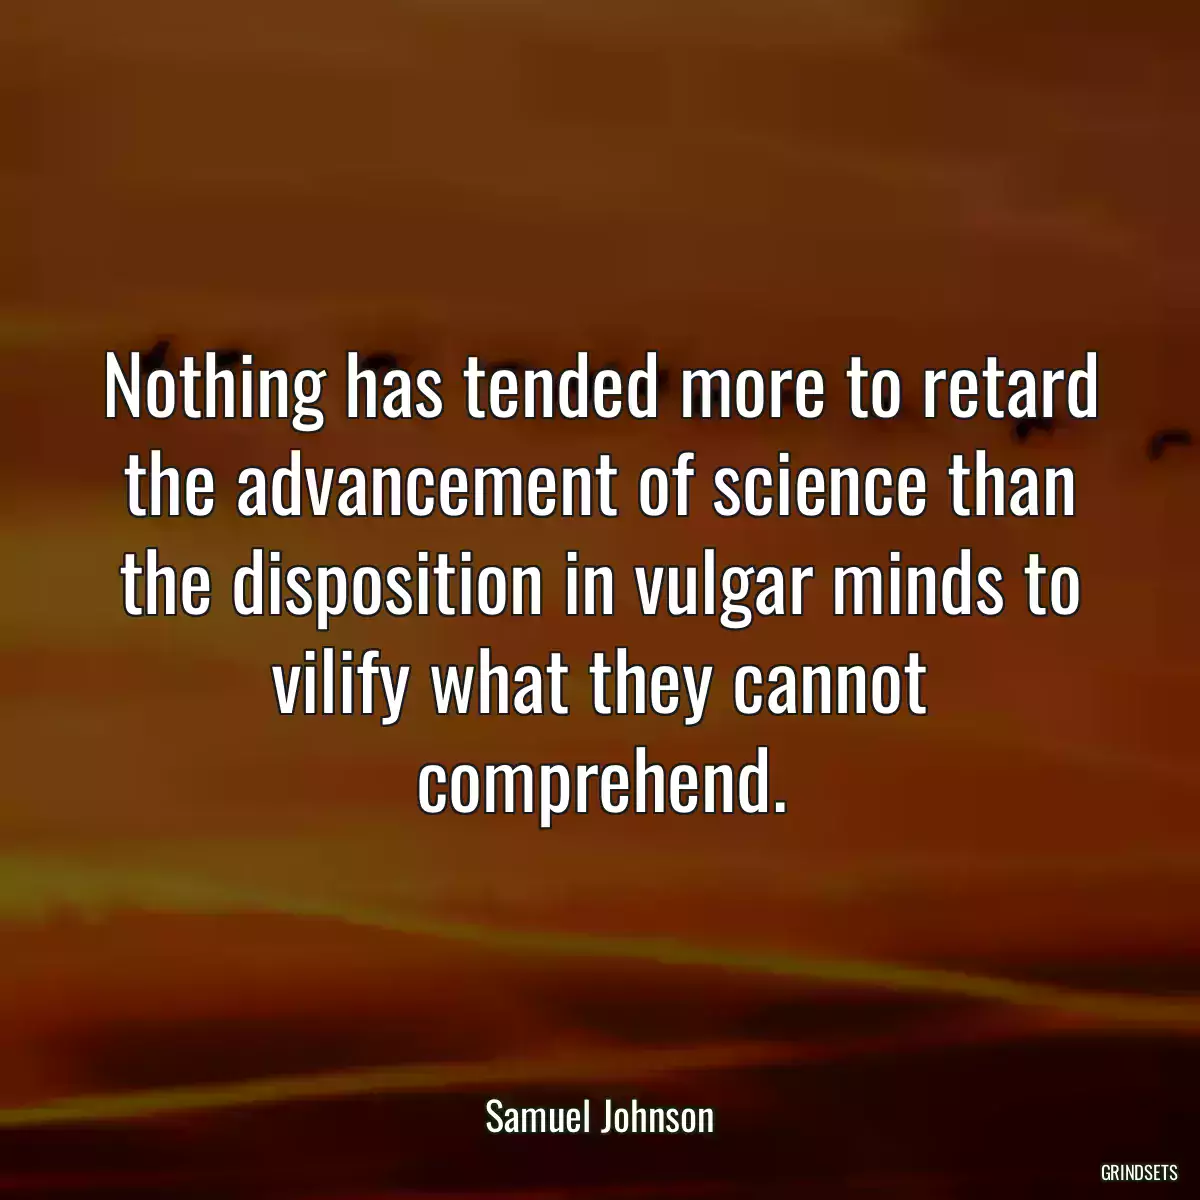 Nothing has tended more to retard the advancement of science than the disposition in vulgar minds to vilify what they cannot comprehend.